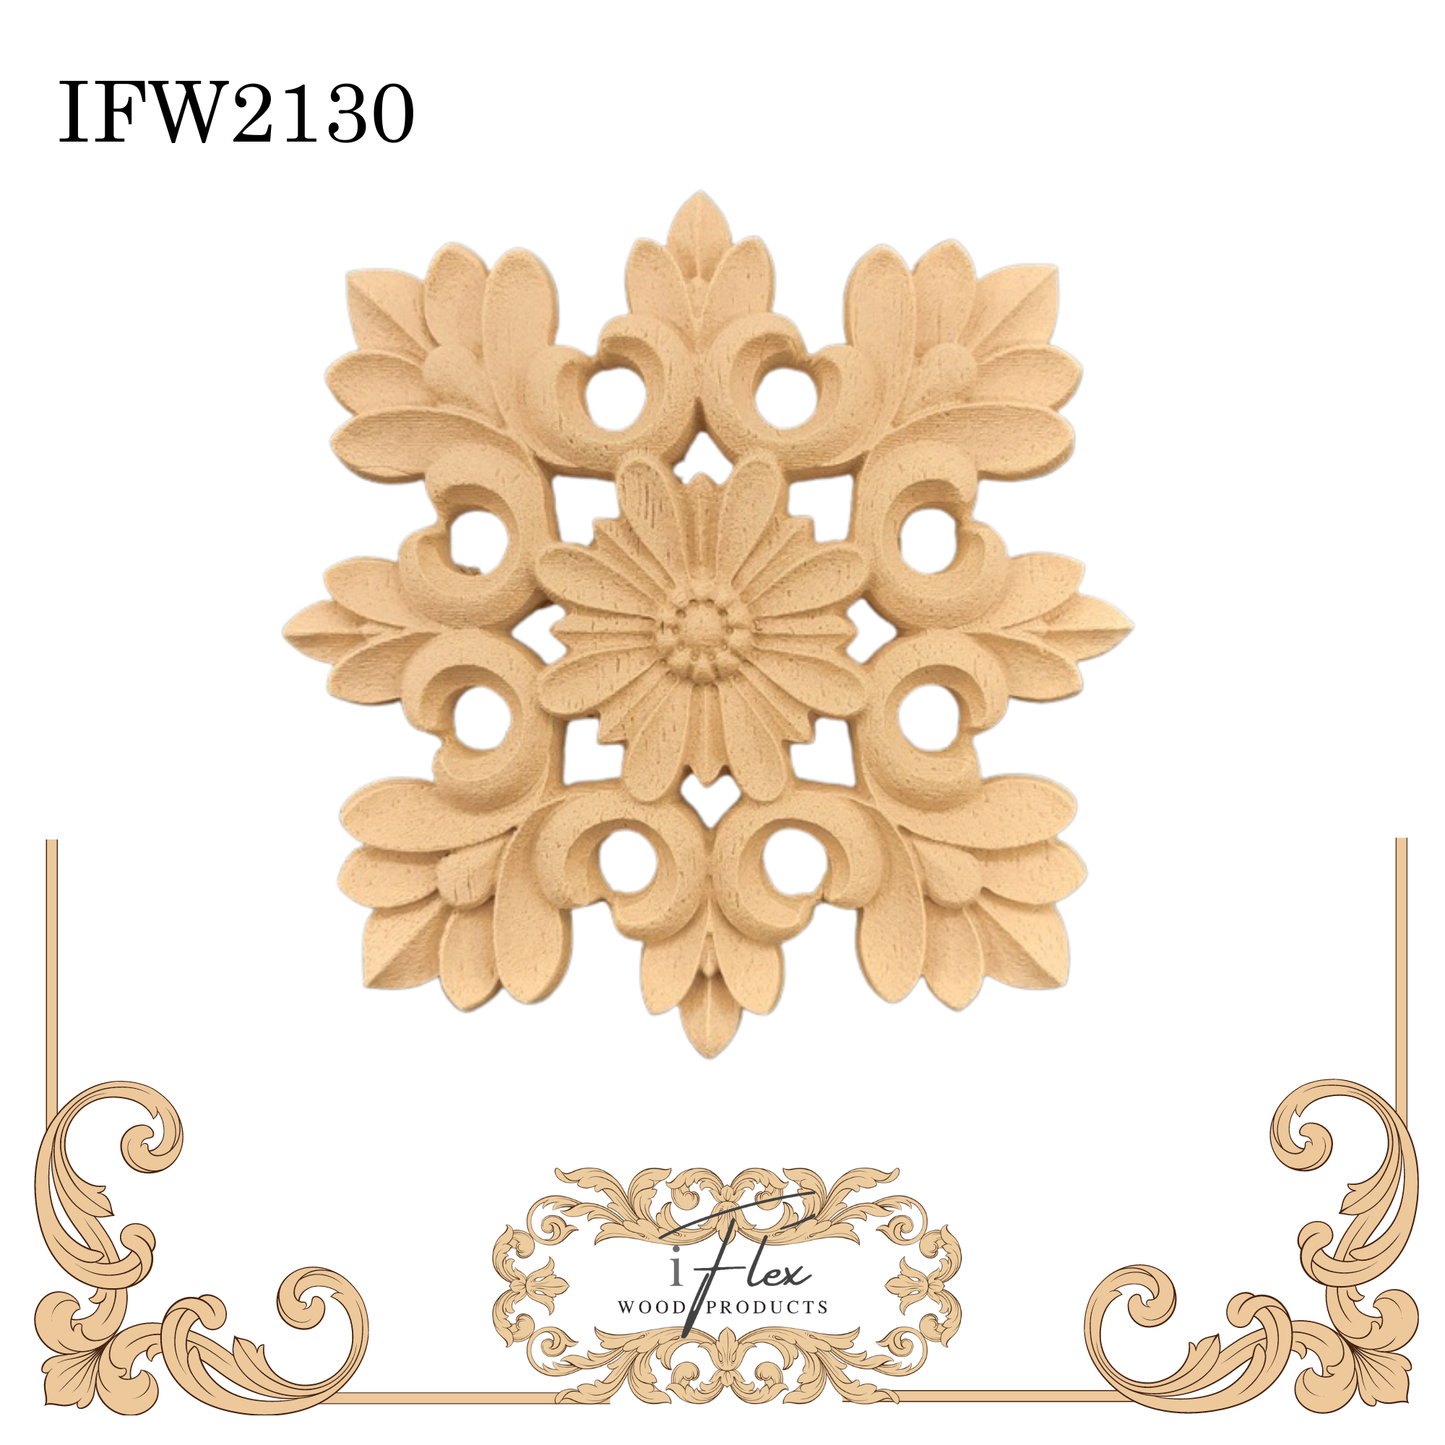 IFW 2130 iFlex Wood Products, bendable mouldings, flexible, wooden appliques, centerpiece